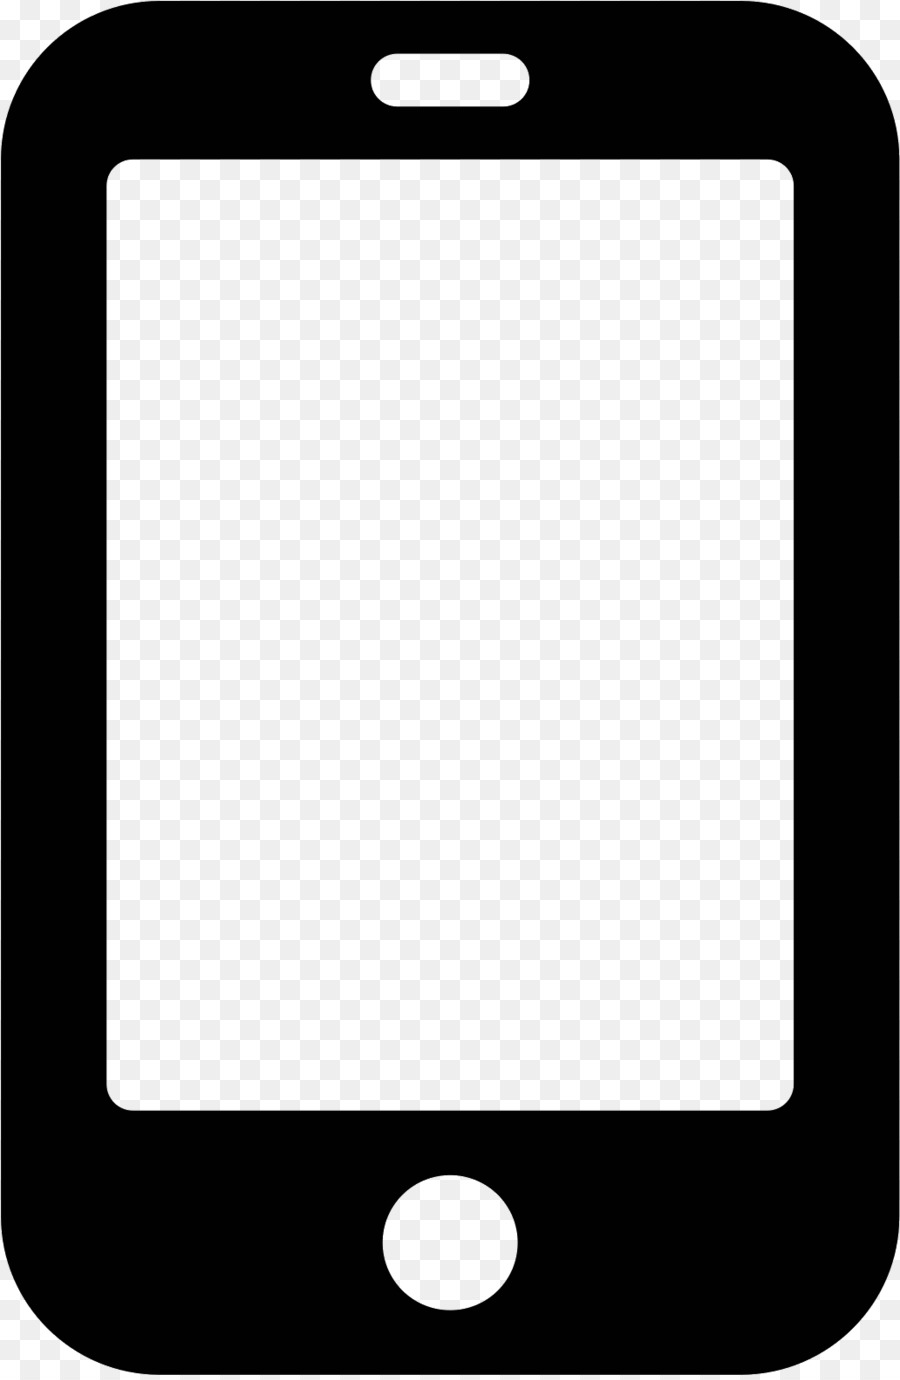 Portable Network Graphics Computer Icons Mobile Phones Clip art Transparency - cards png clipart png download - 1032*1577 - Free Transparent Computer Icons png Download.